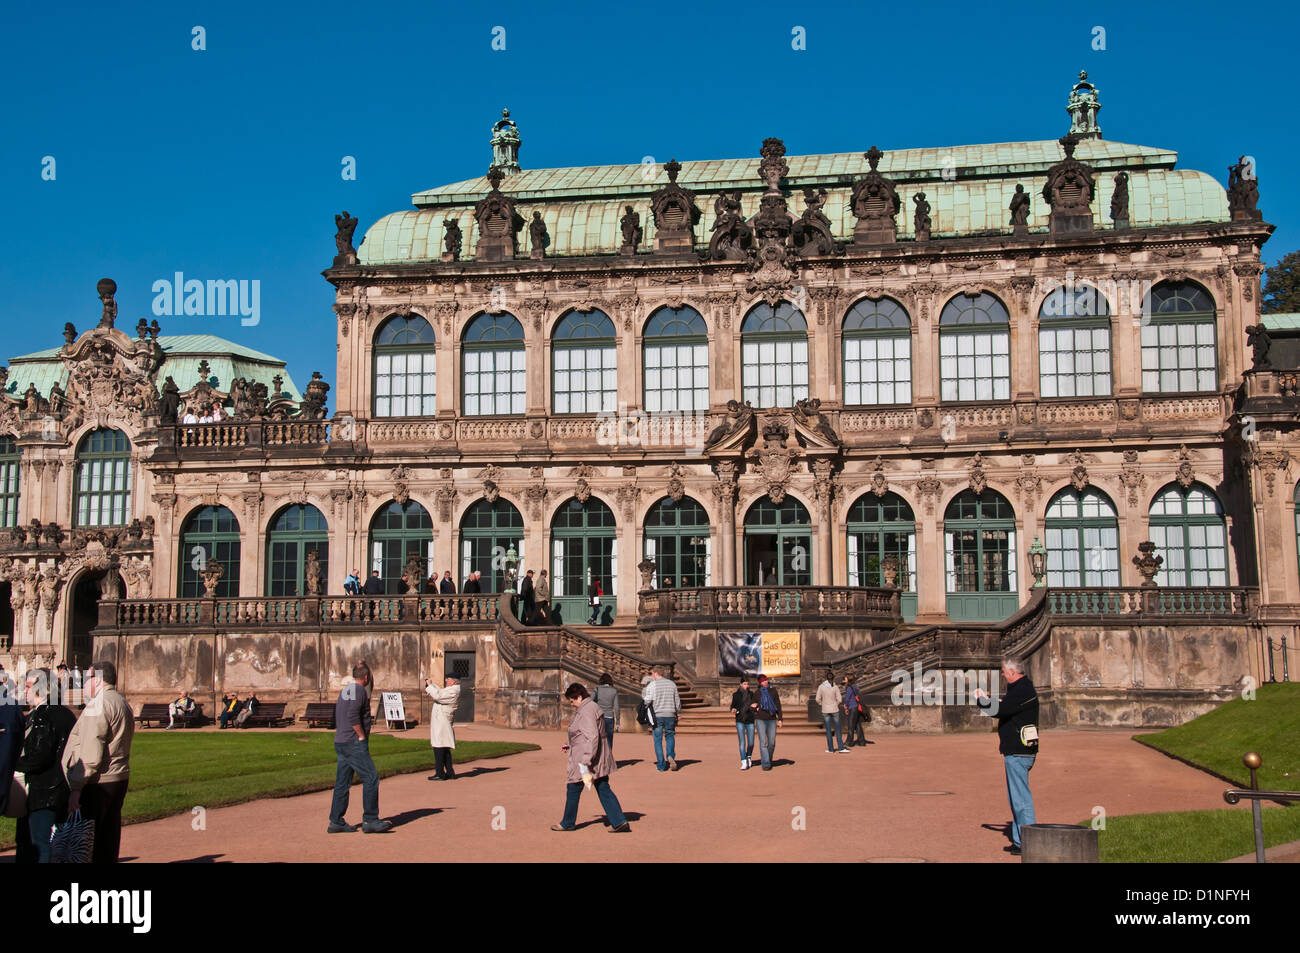 Interior inner courtyard of Zwinger Palace with tourists and a large palace pavilion in the background, Dresden Germany Stock Photo